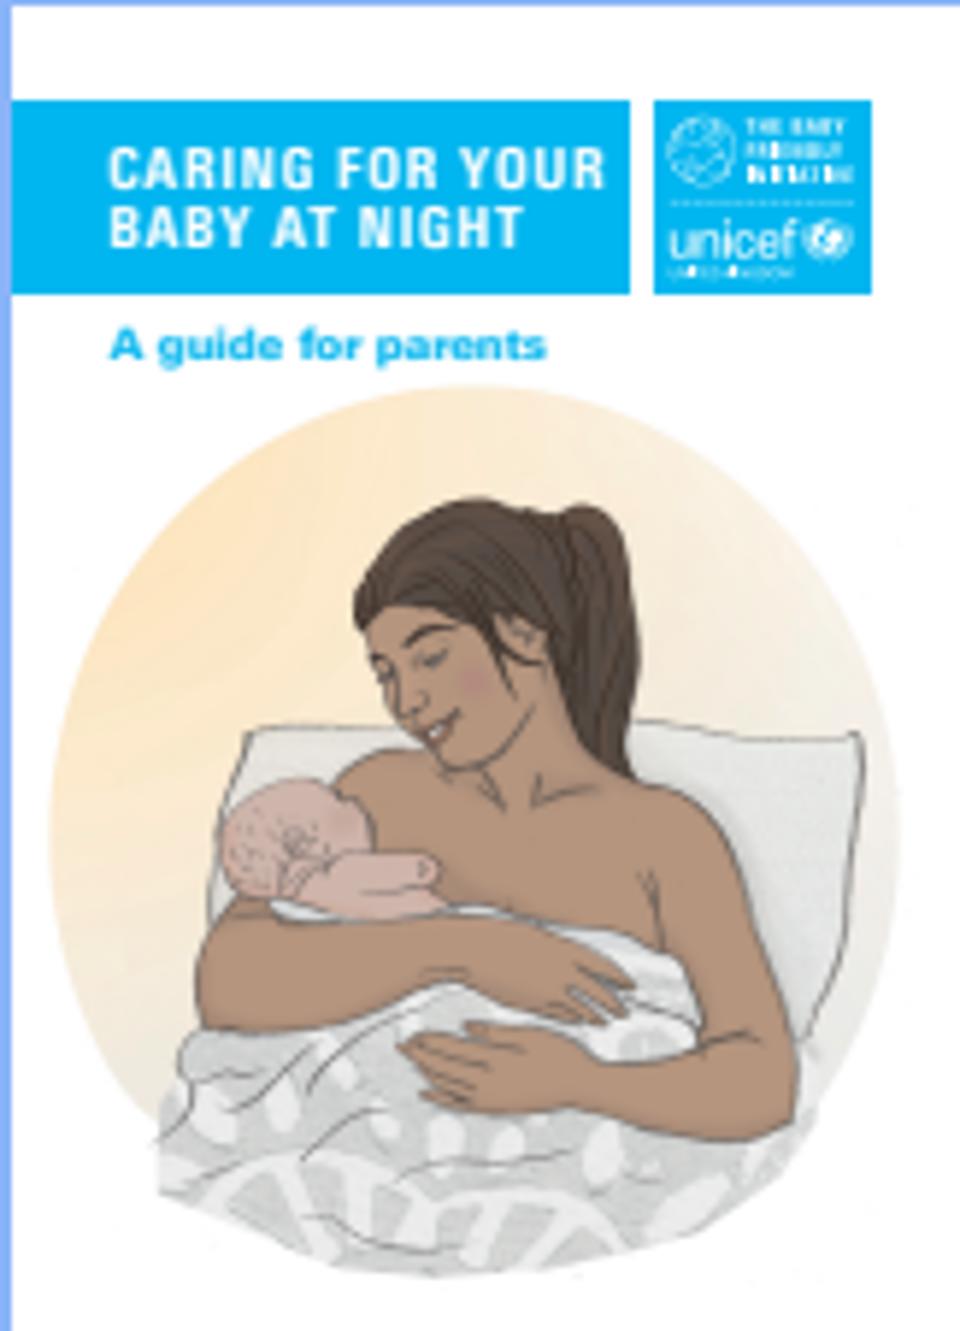 Caring For Your Baby At Night guide